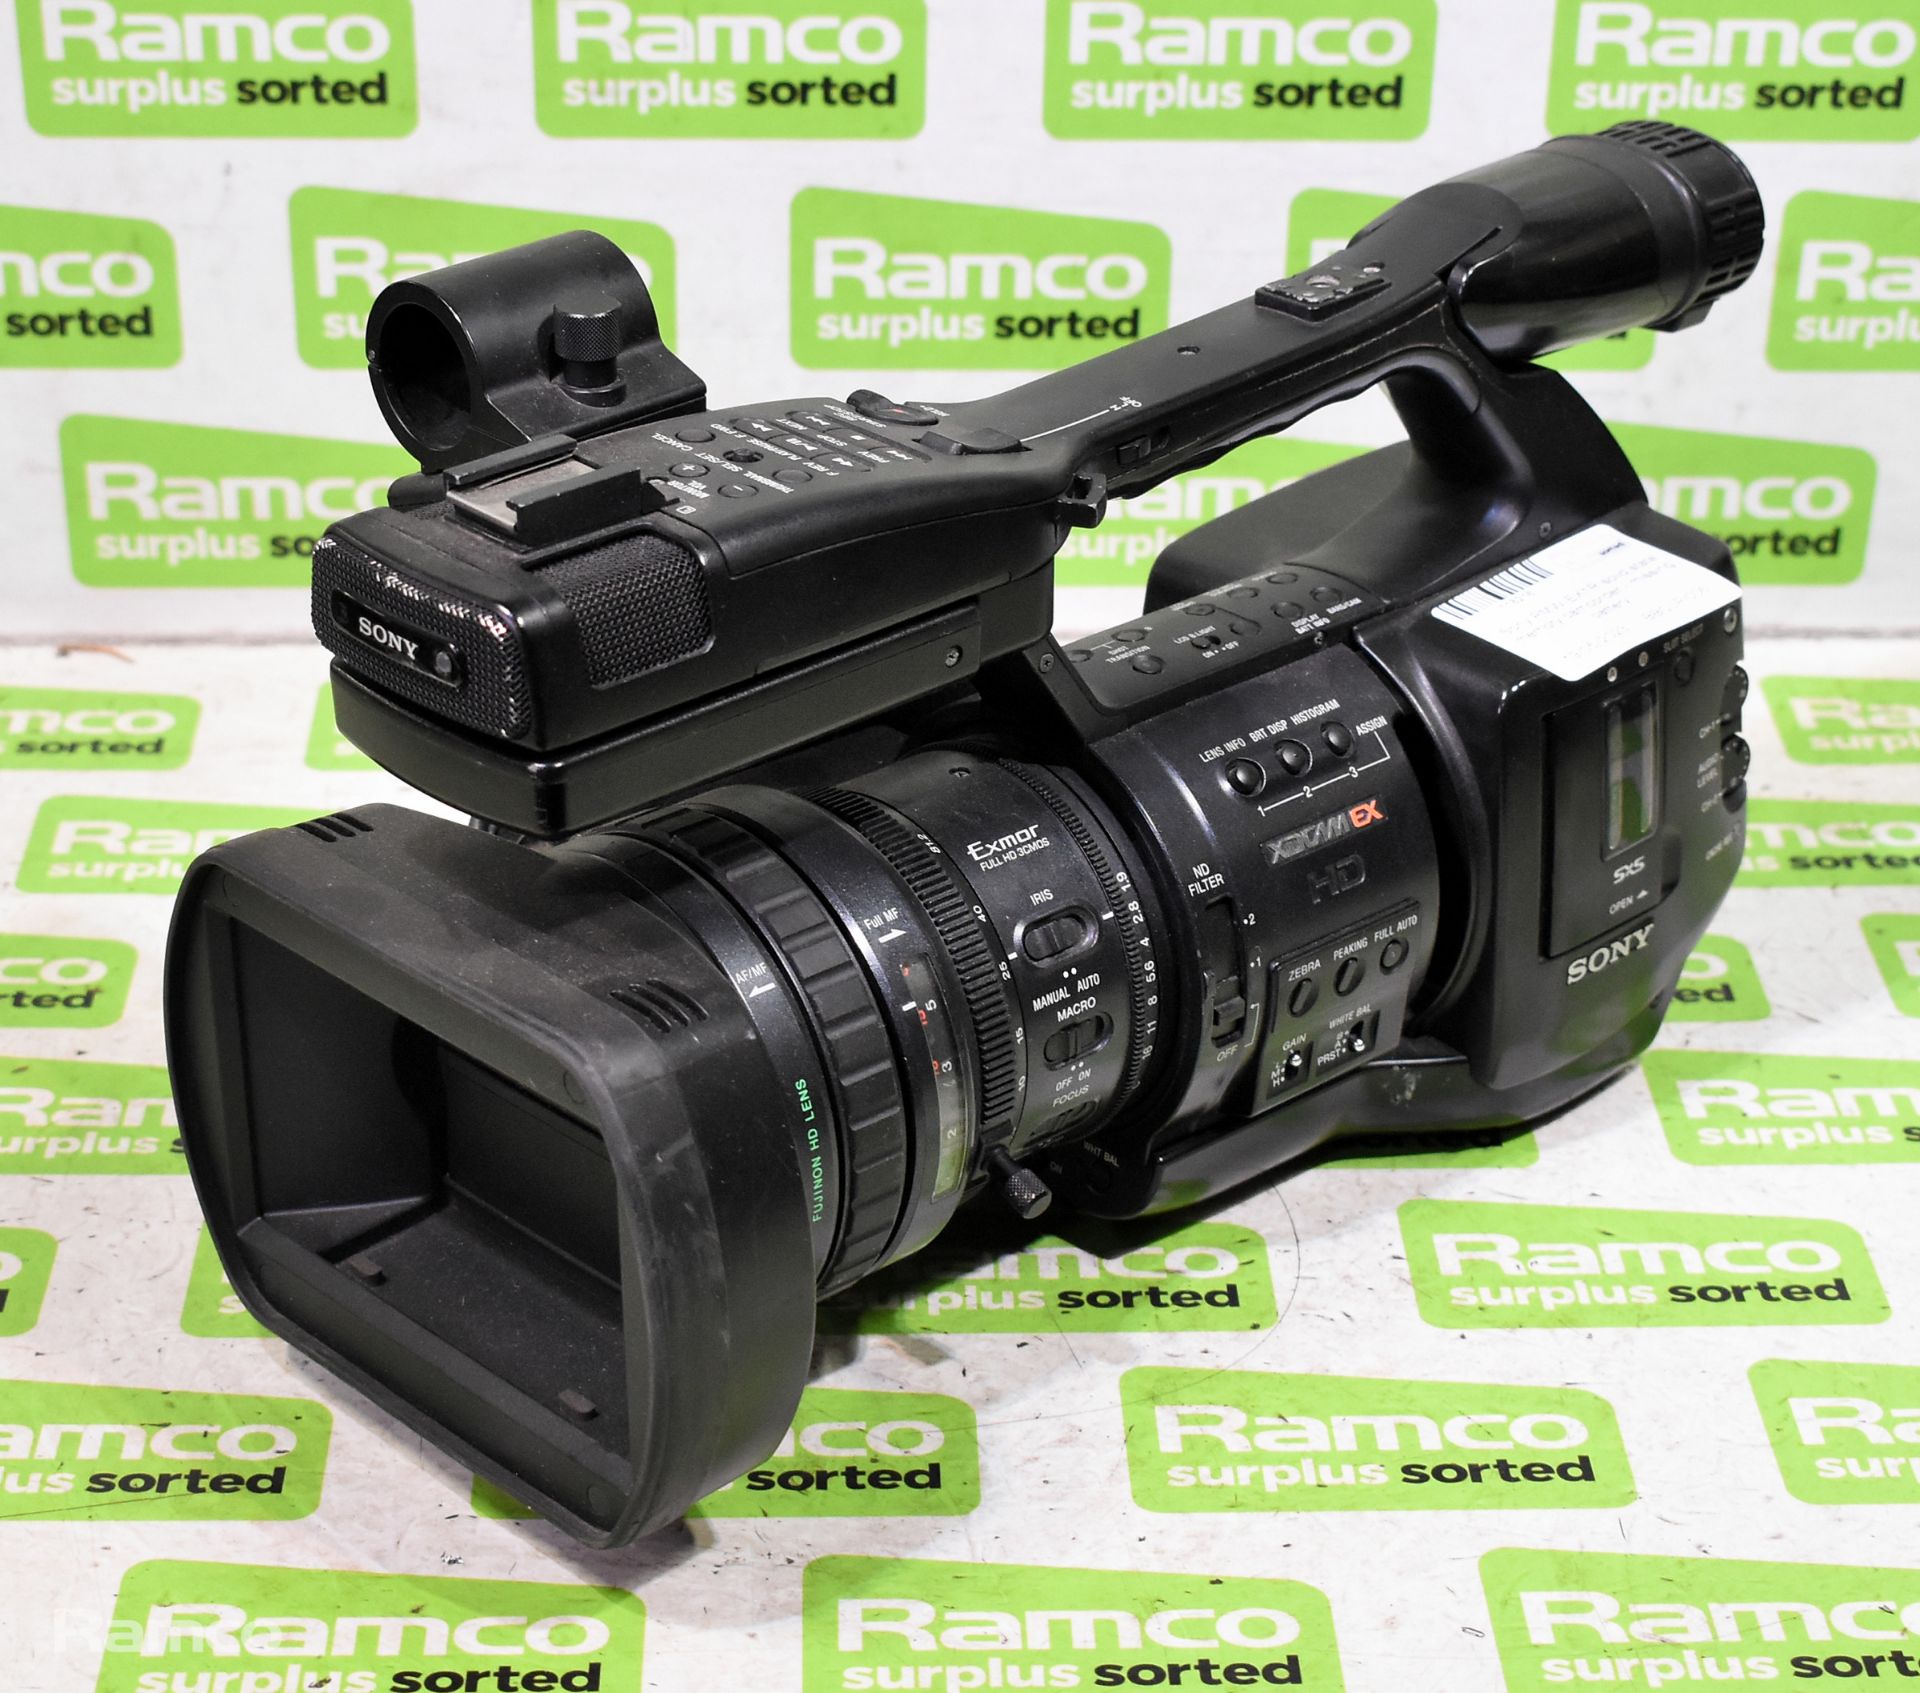 Sony PMW-EX1R solid state memory camcorder - EXMOR full HD 3CMOS - XDCAM EX HD - missing battery